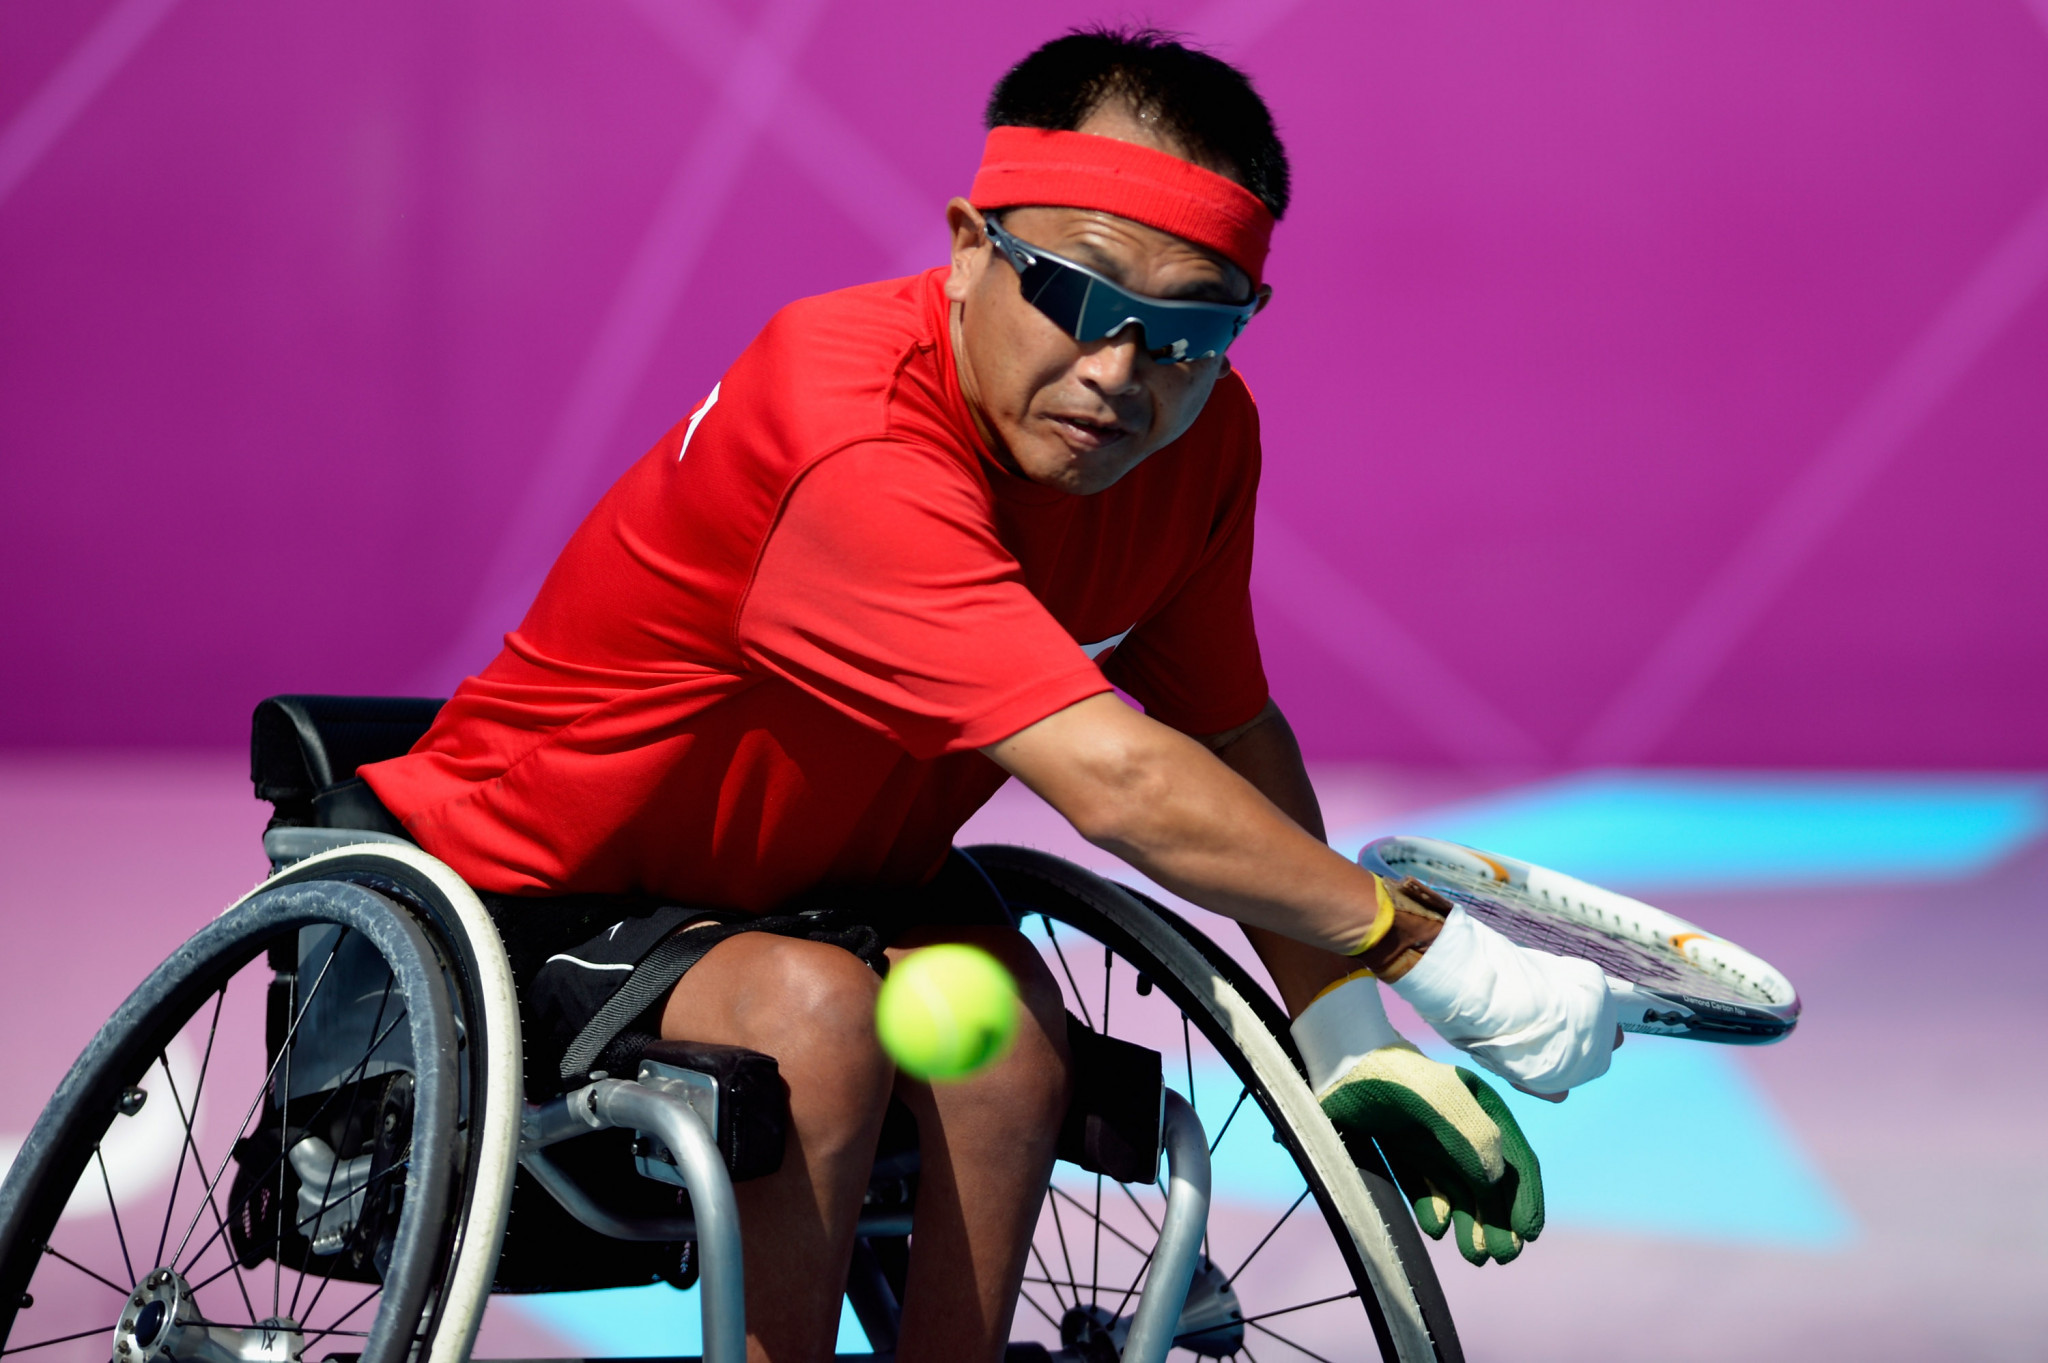 Japan's Moroishi to face quad singles top seed Lapthorne at British Open Wheelchair Tennis Championships